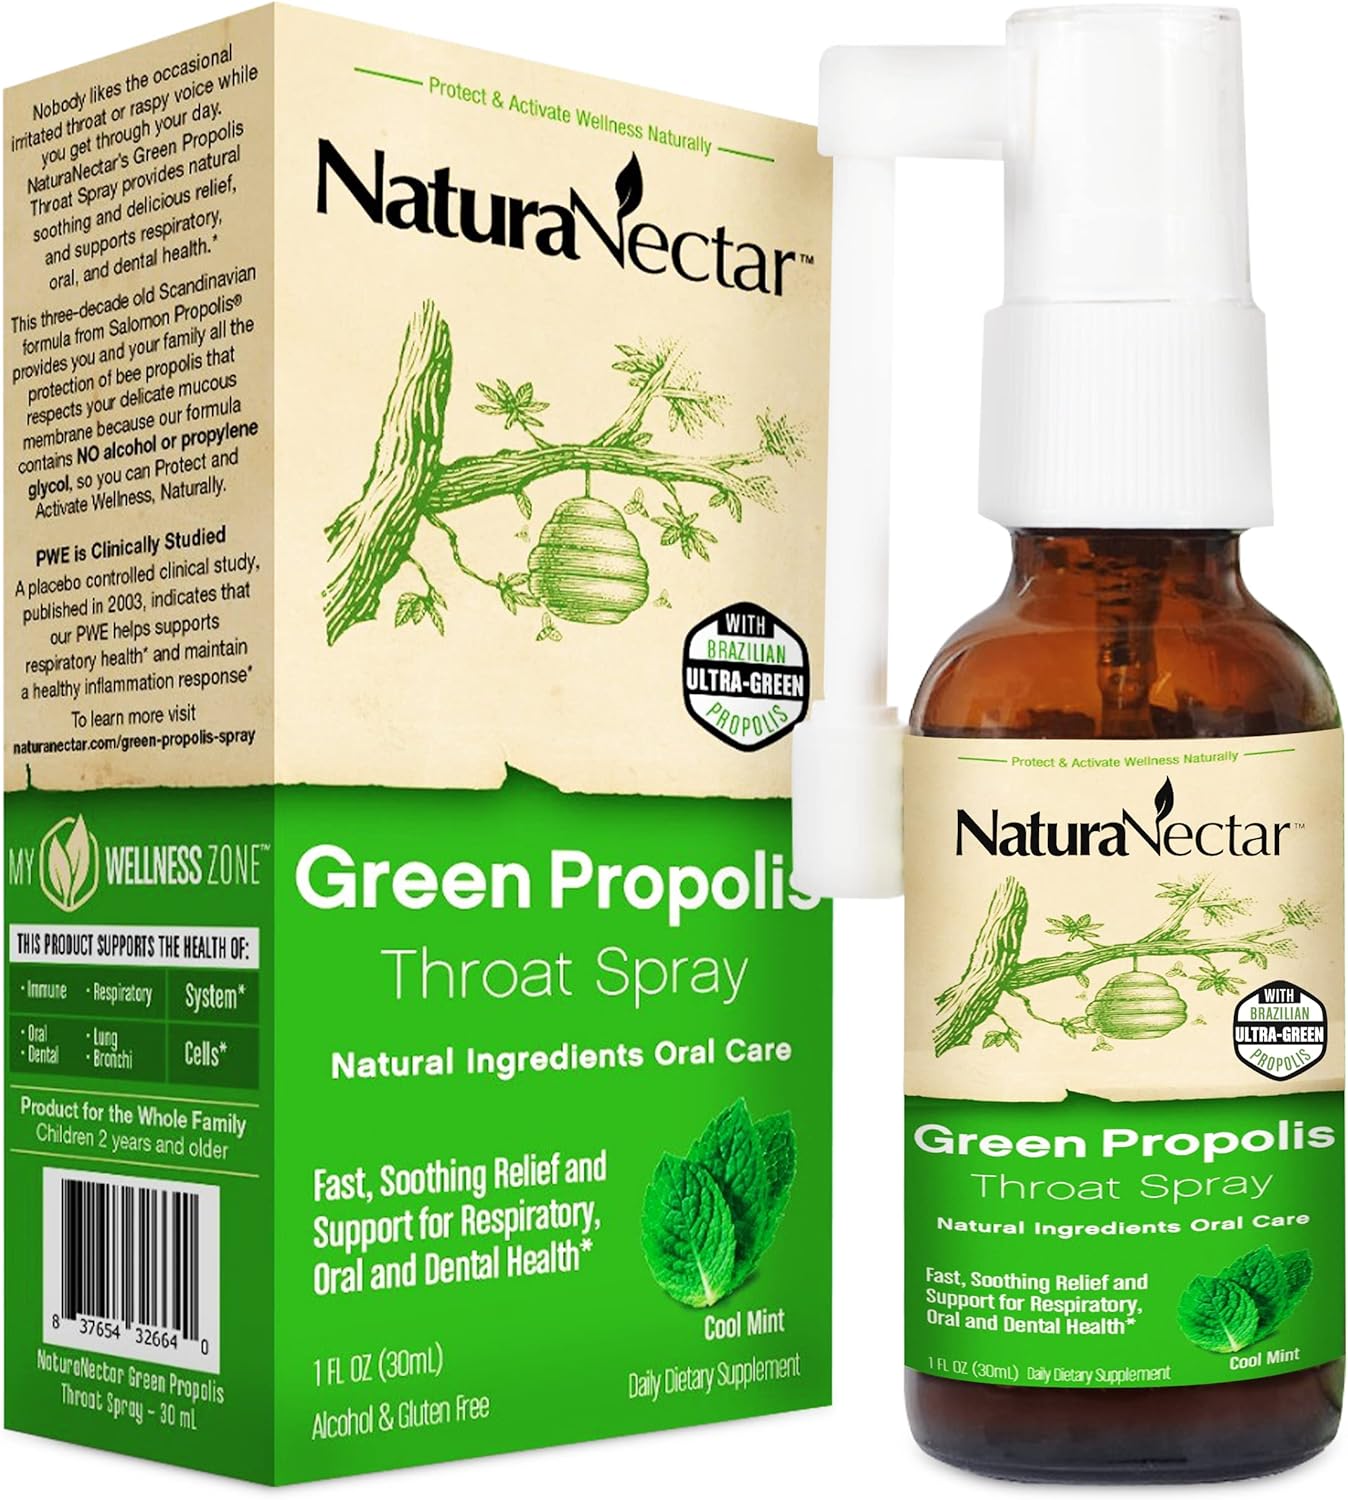 Green Propolis Throat Spray – Organic aromatic acids to support throat* & immune health*. A daily companion for throat comfort. Cool mint flavor